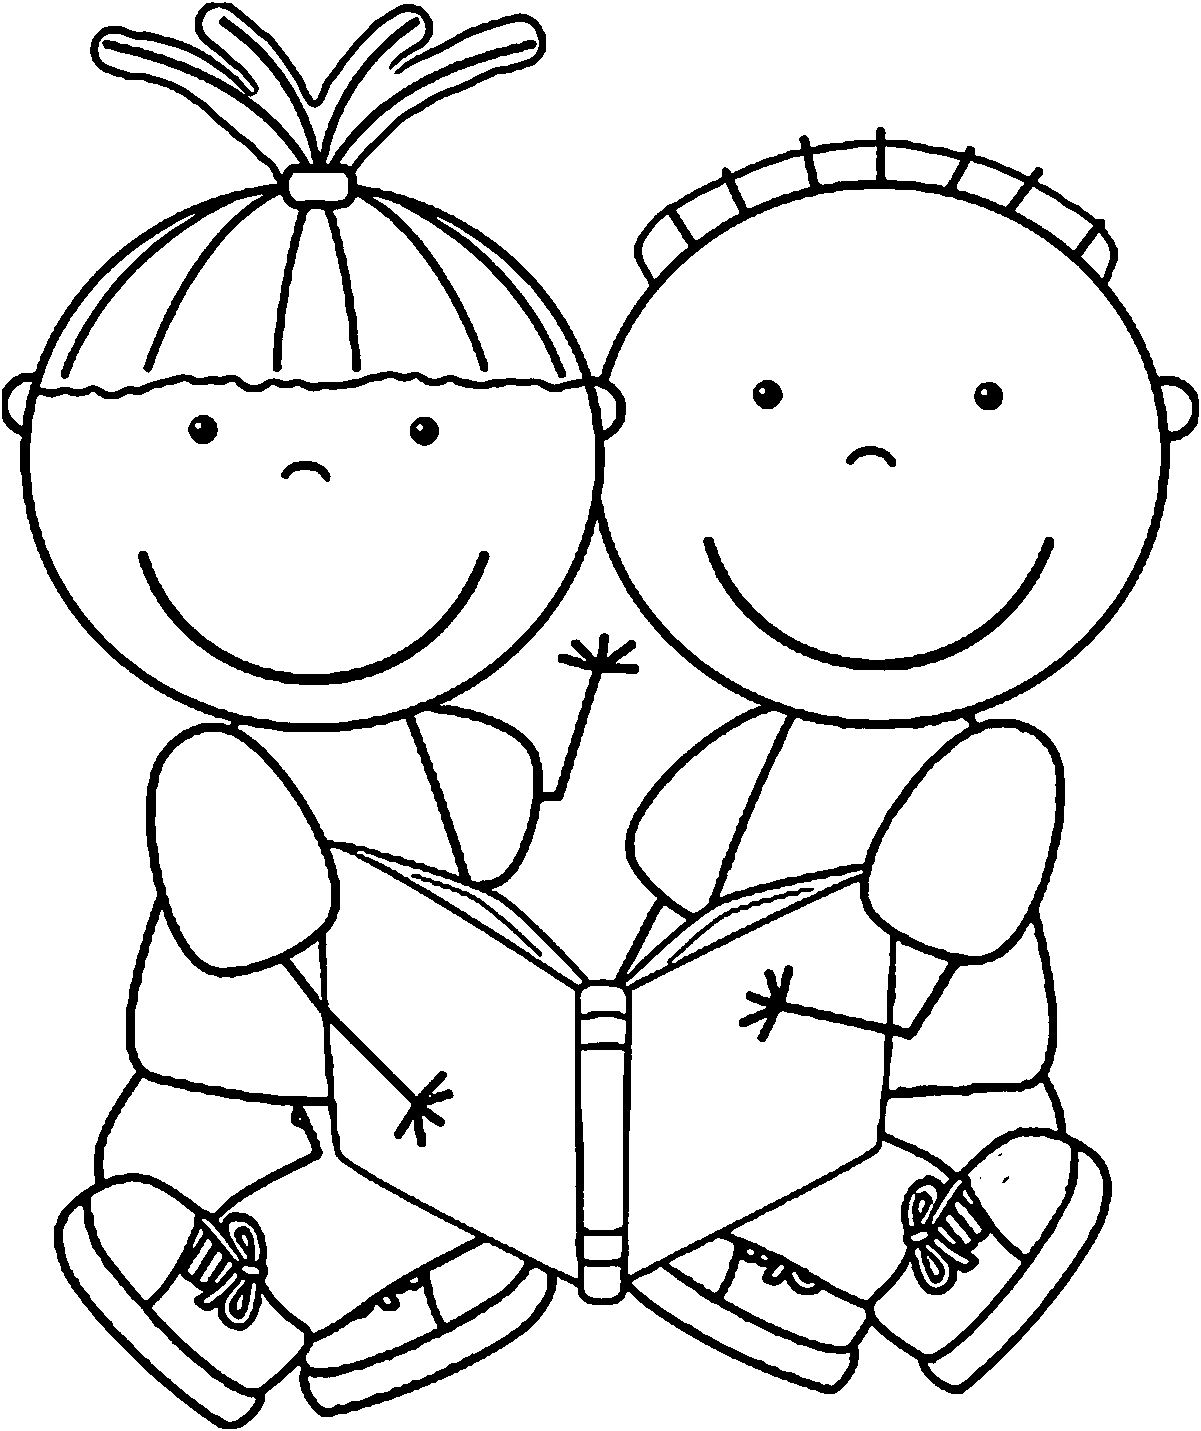  Educational Fun Kids Coloring Pages 10